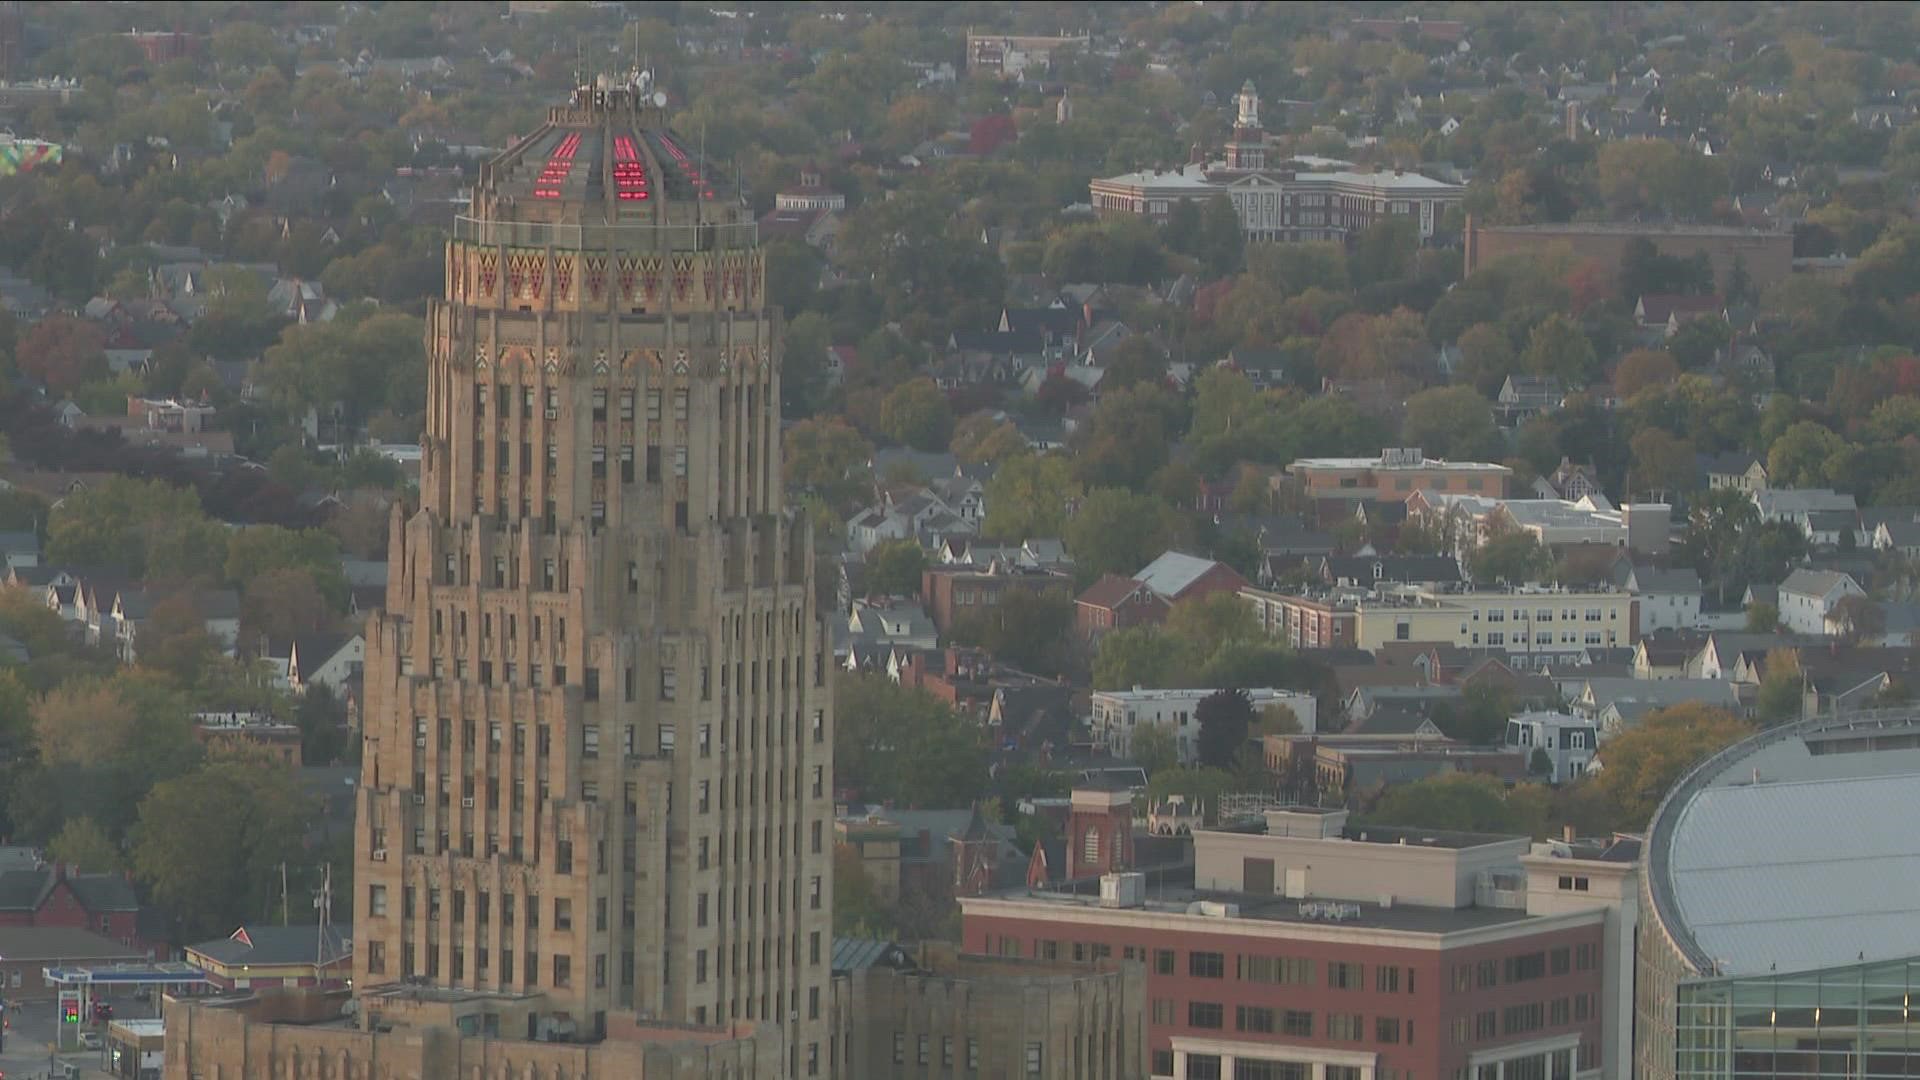 City of Buffalo Sued over Redistricting